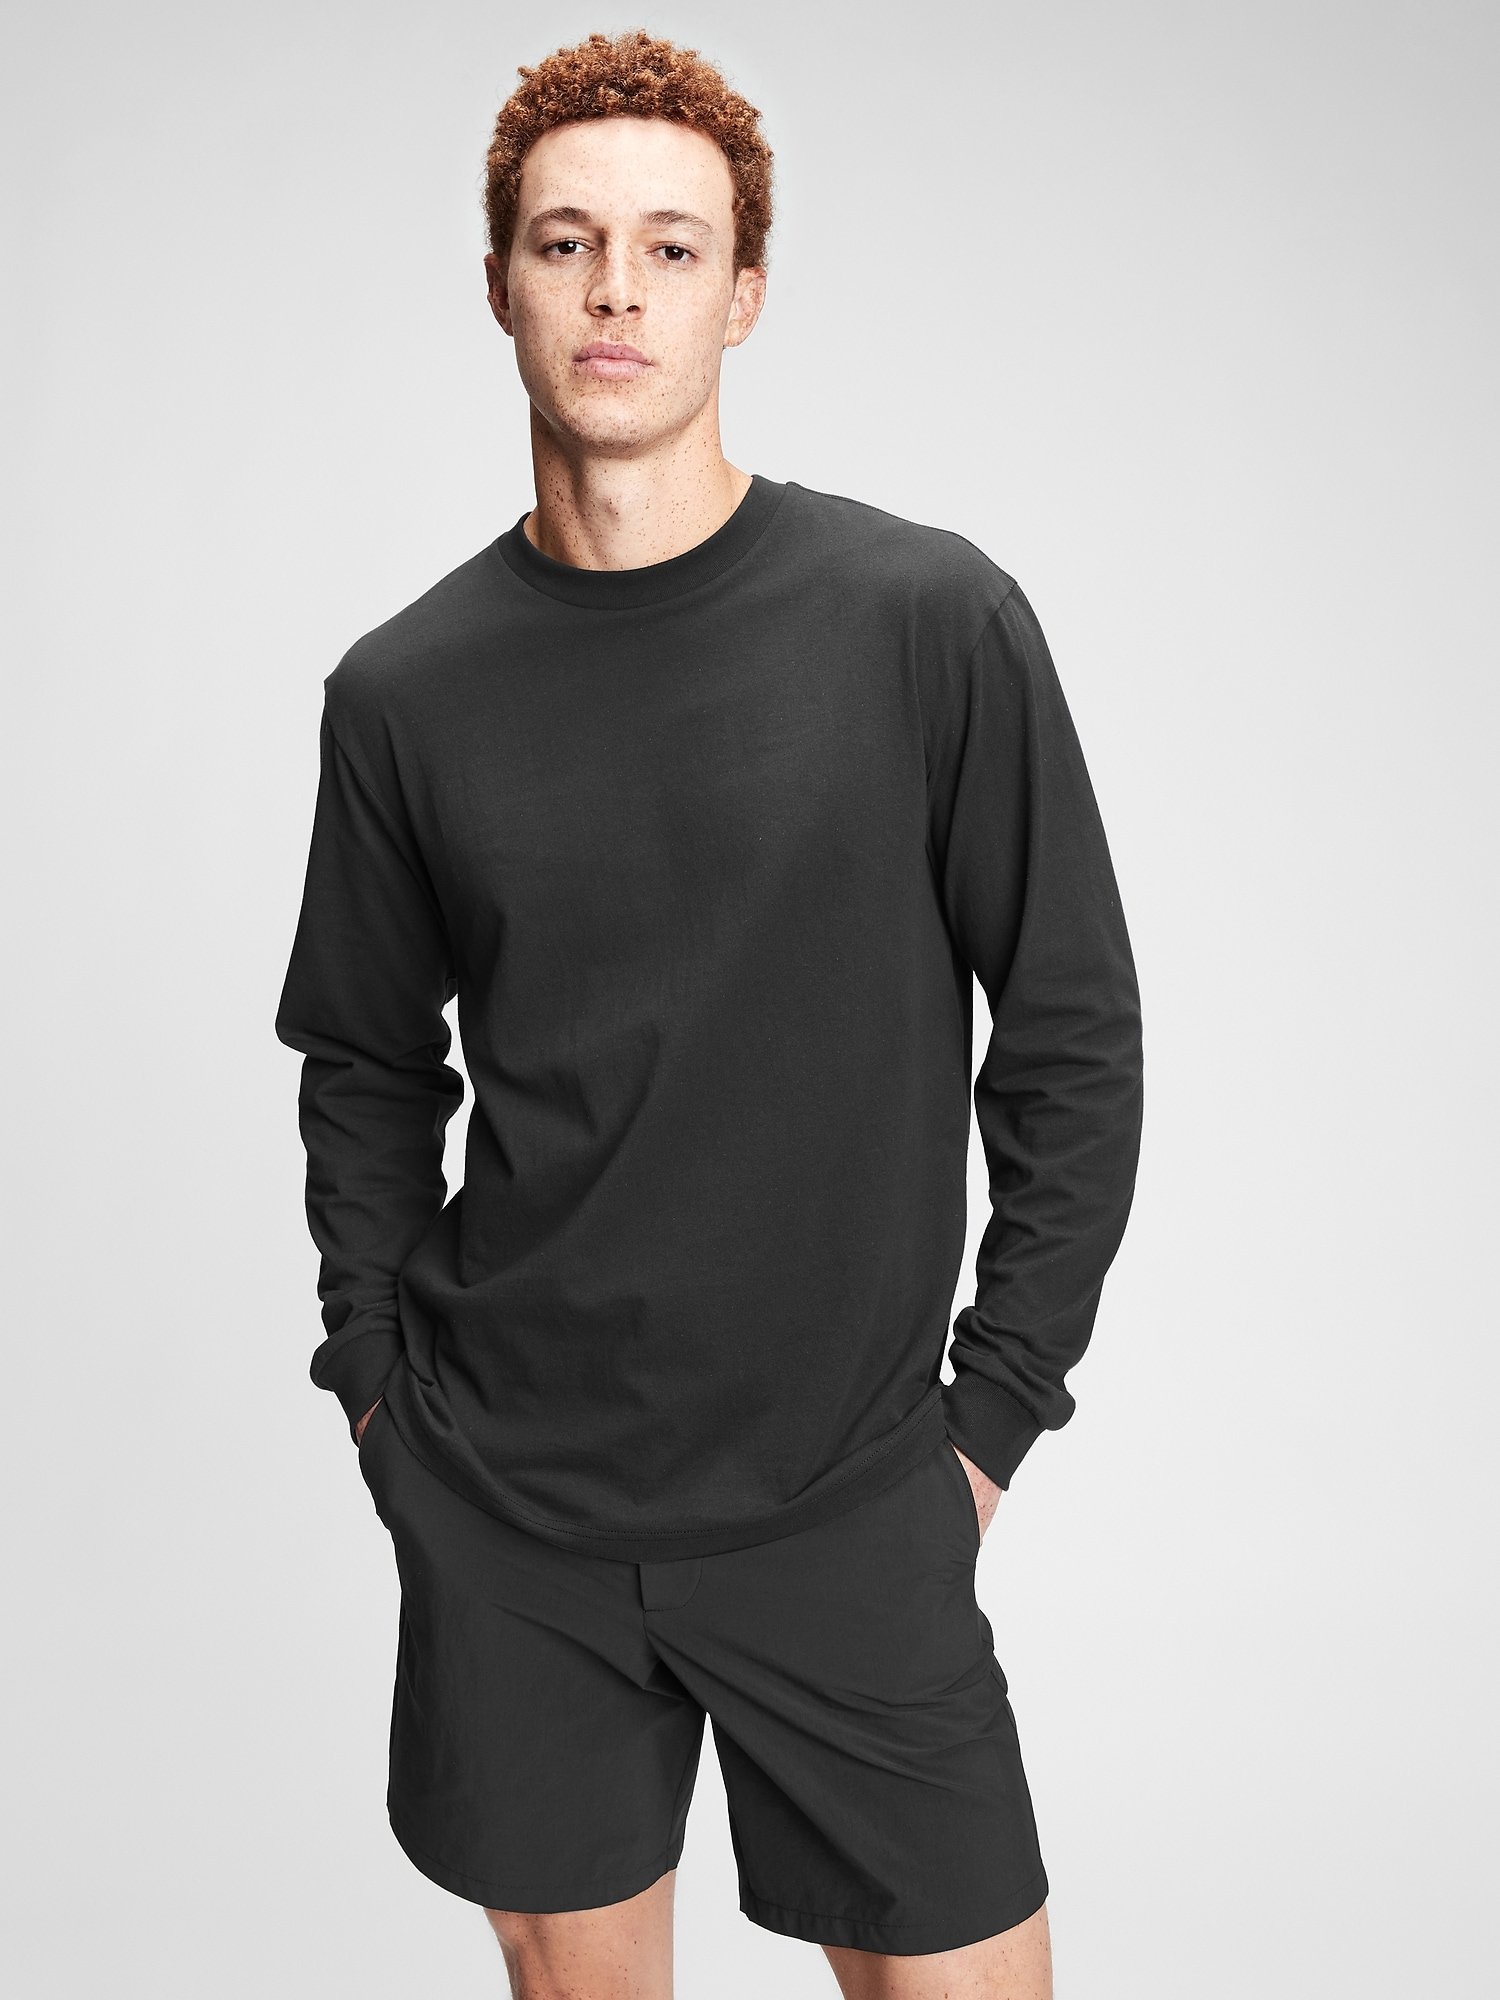 Relaxed Fit T-Shirt product image